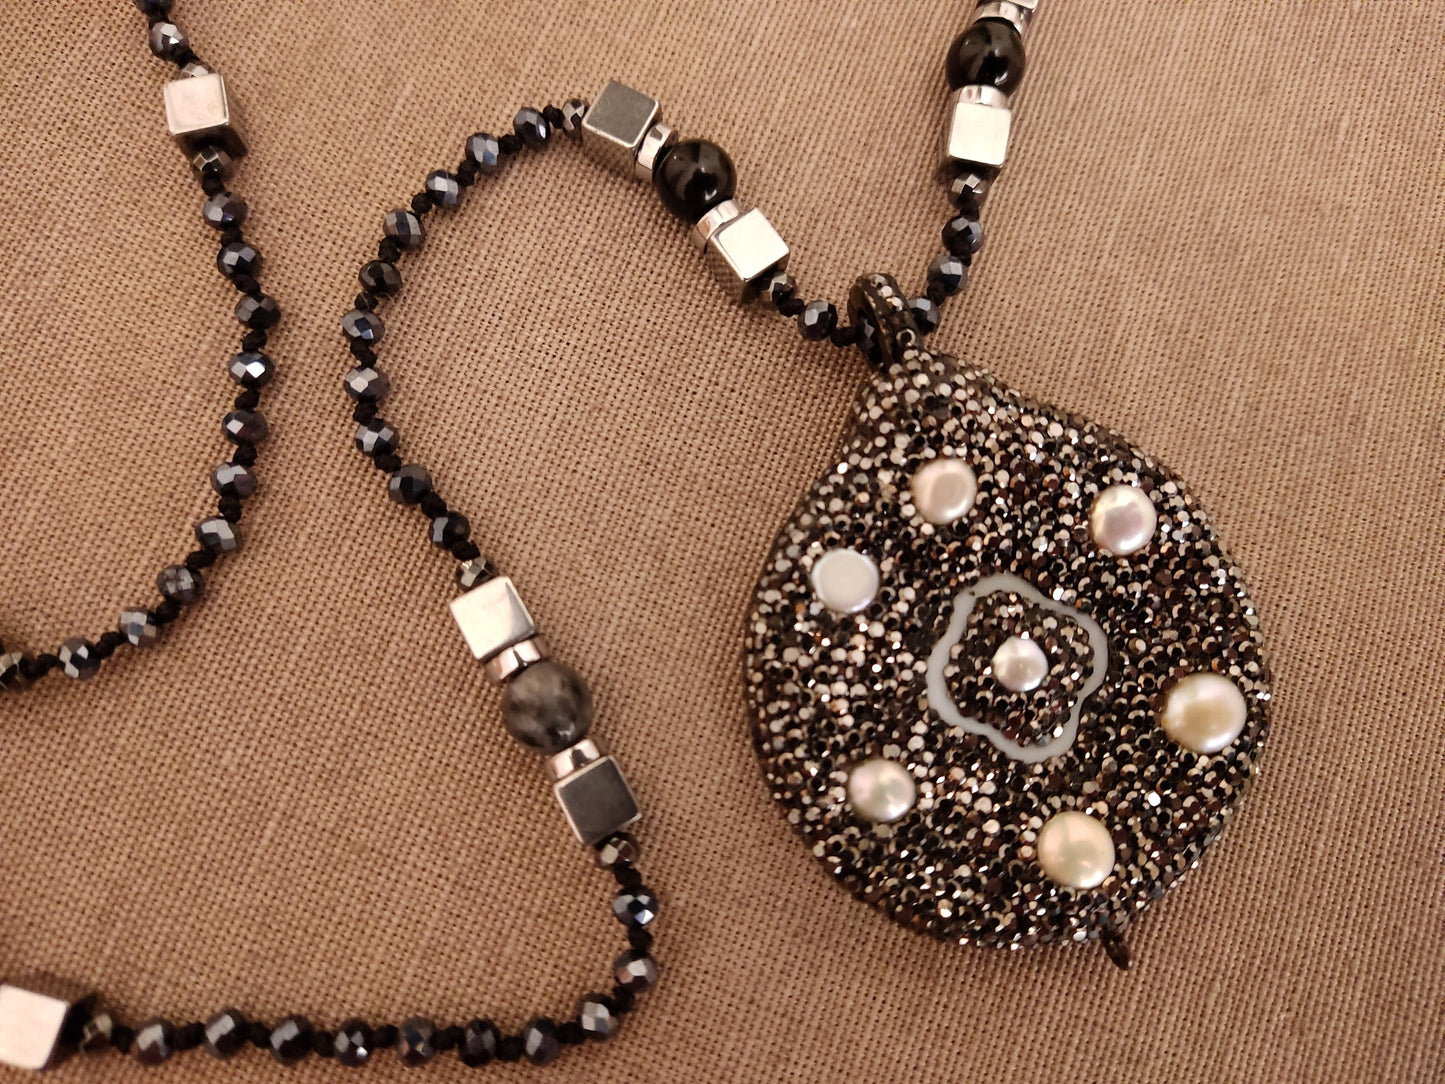 Handmade Long Semi Precious Stones Necklace, Pendant With Markasite - Perles - Mother Of Pearl, 75cm, Griechische Halskette Schmuck, Jewelry